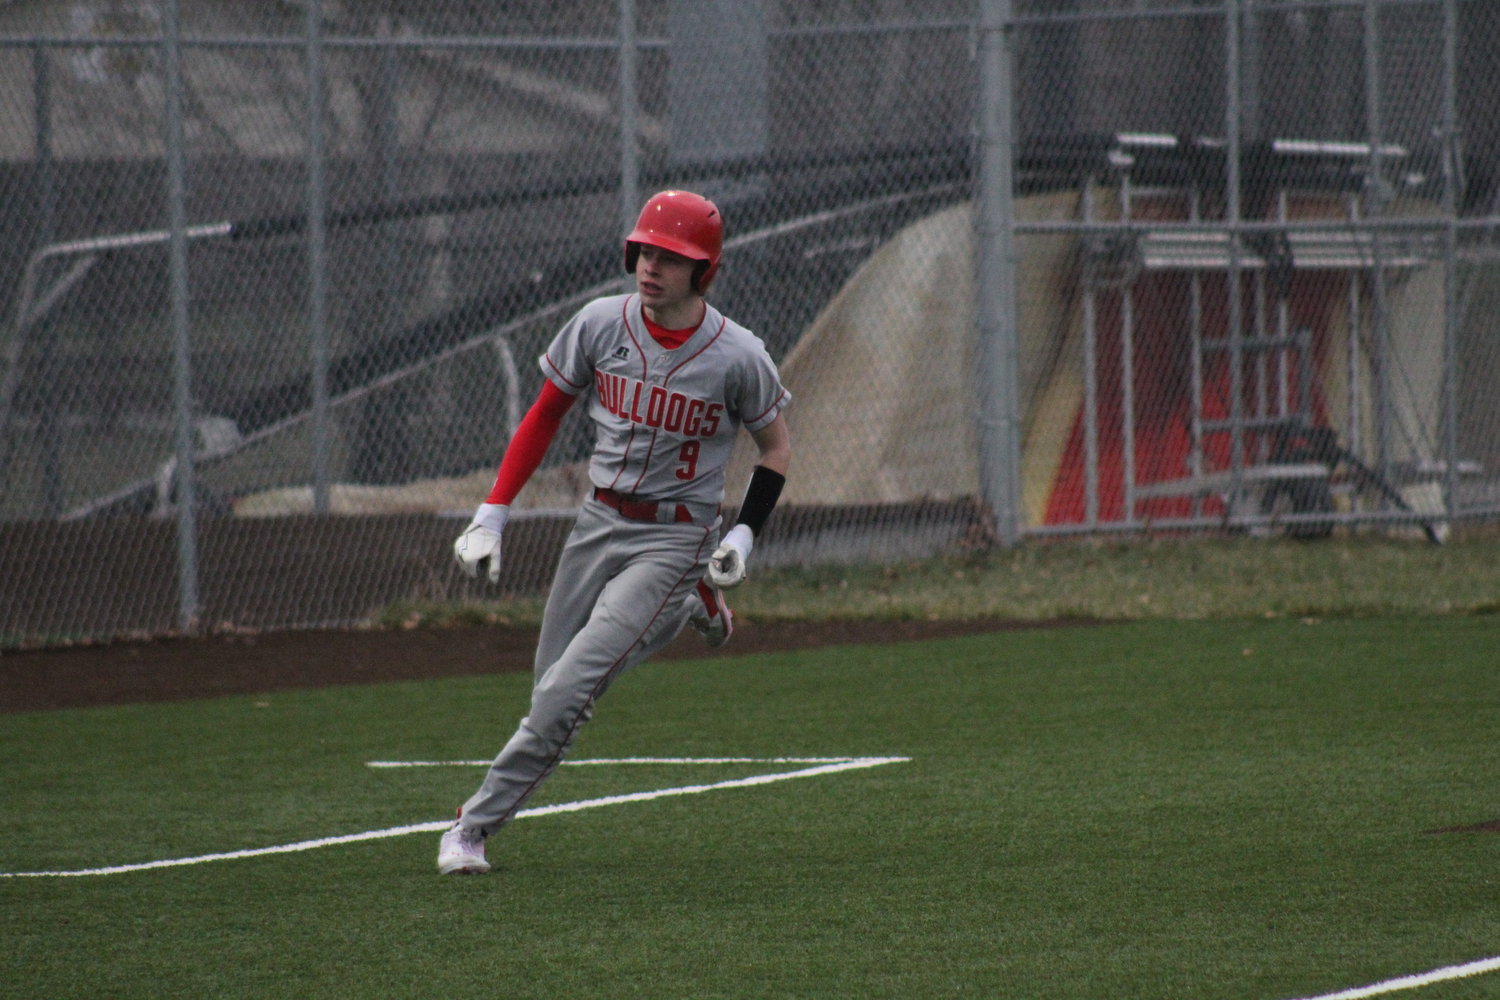 Mexico sophomore Sam Ryan rounds third base against Marshall on Thursday at home. Ryan finished with two hits and two RBI.